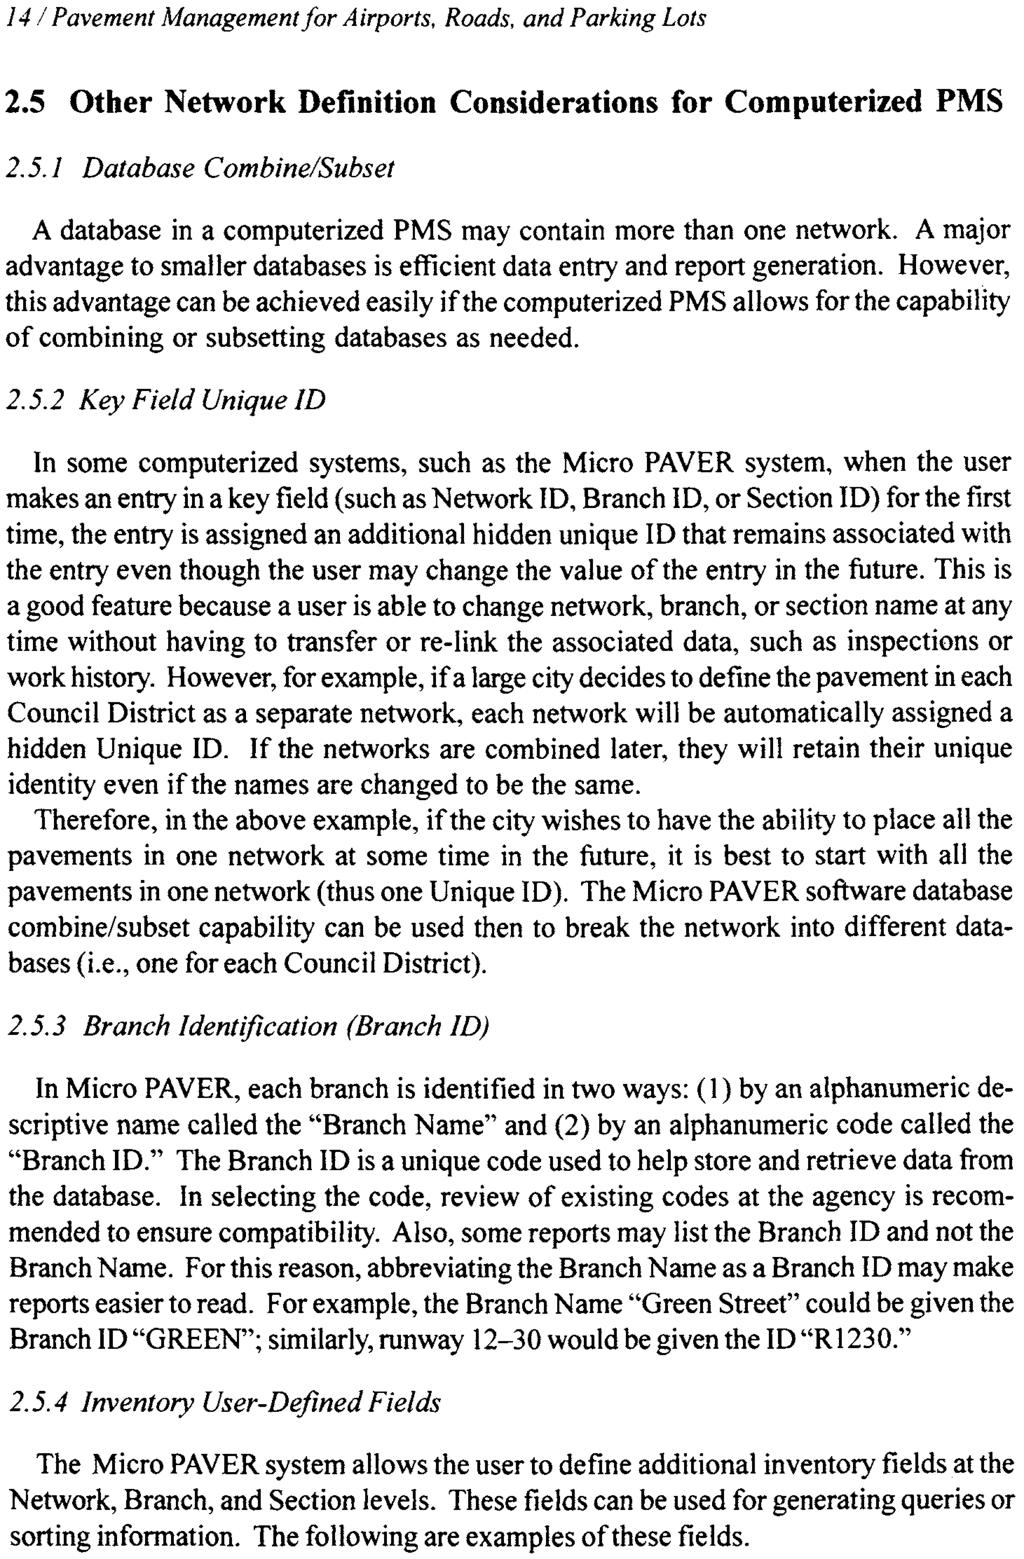 14 /Pavement Management for Airports, Roads, and Parking Lots 2.5 Other Network Definition Considerations for Computerized PMS 2.5.1 Database Combine/Subset A database in a computerized PMS may contain more than one network.